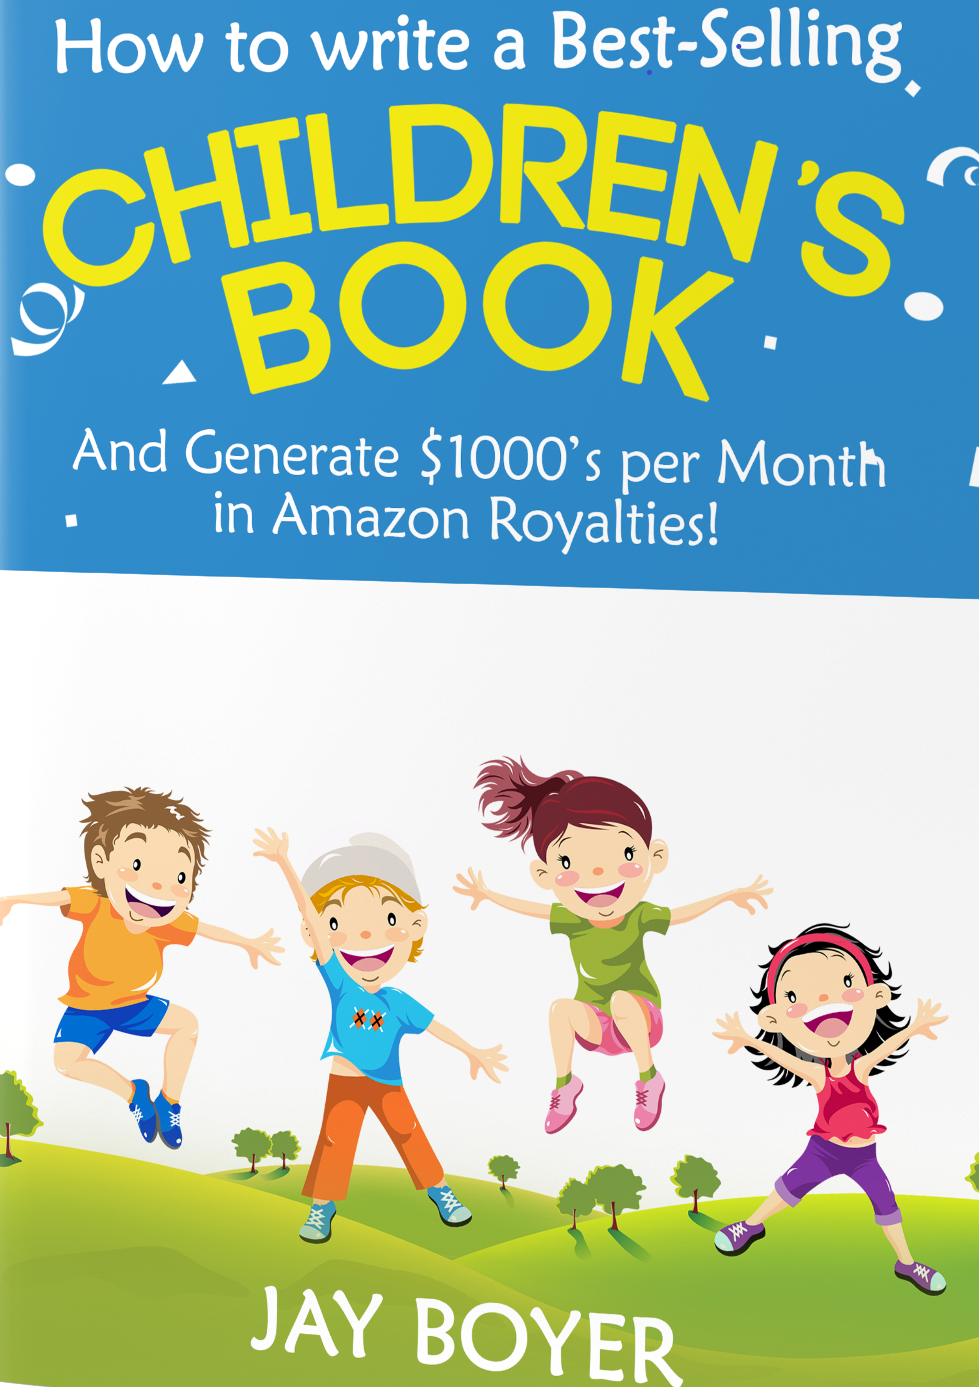 Write Chapter Books For Kids & Get Amazon Bestseller With Jay Boyer's Tips 2022